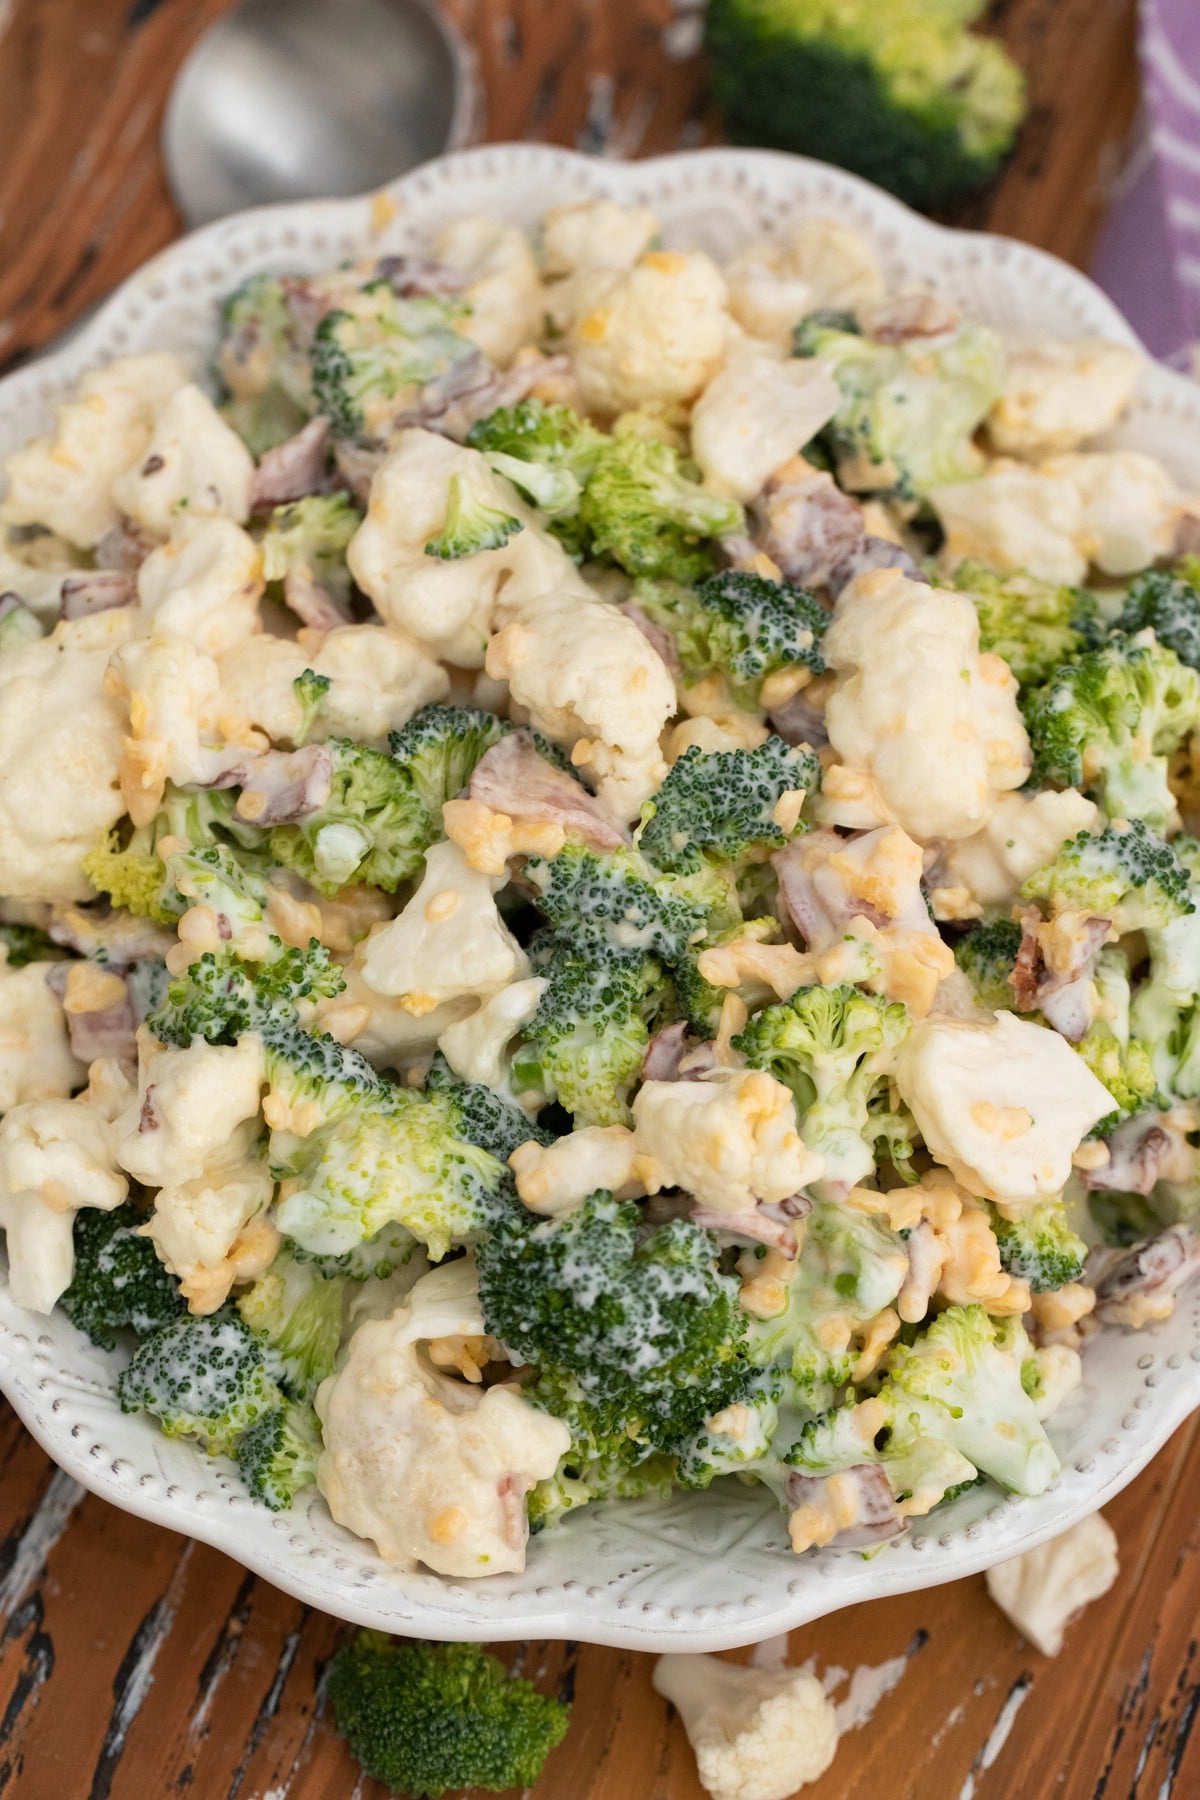 White bowl on table with broccoli and cauliflower salad